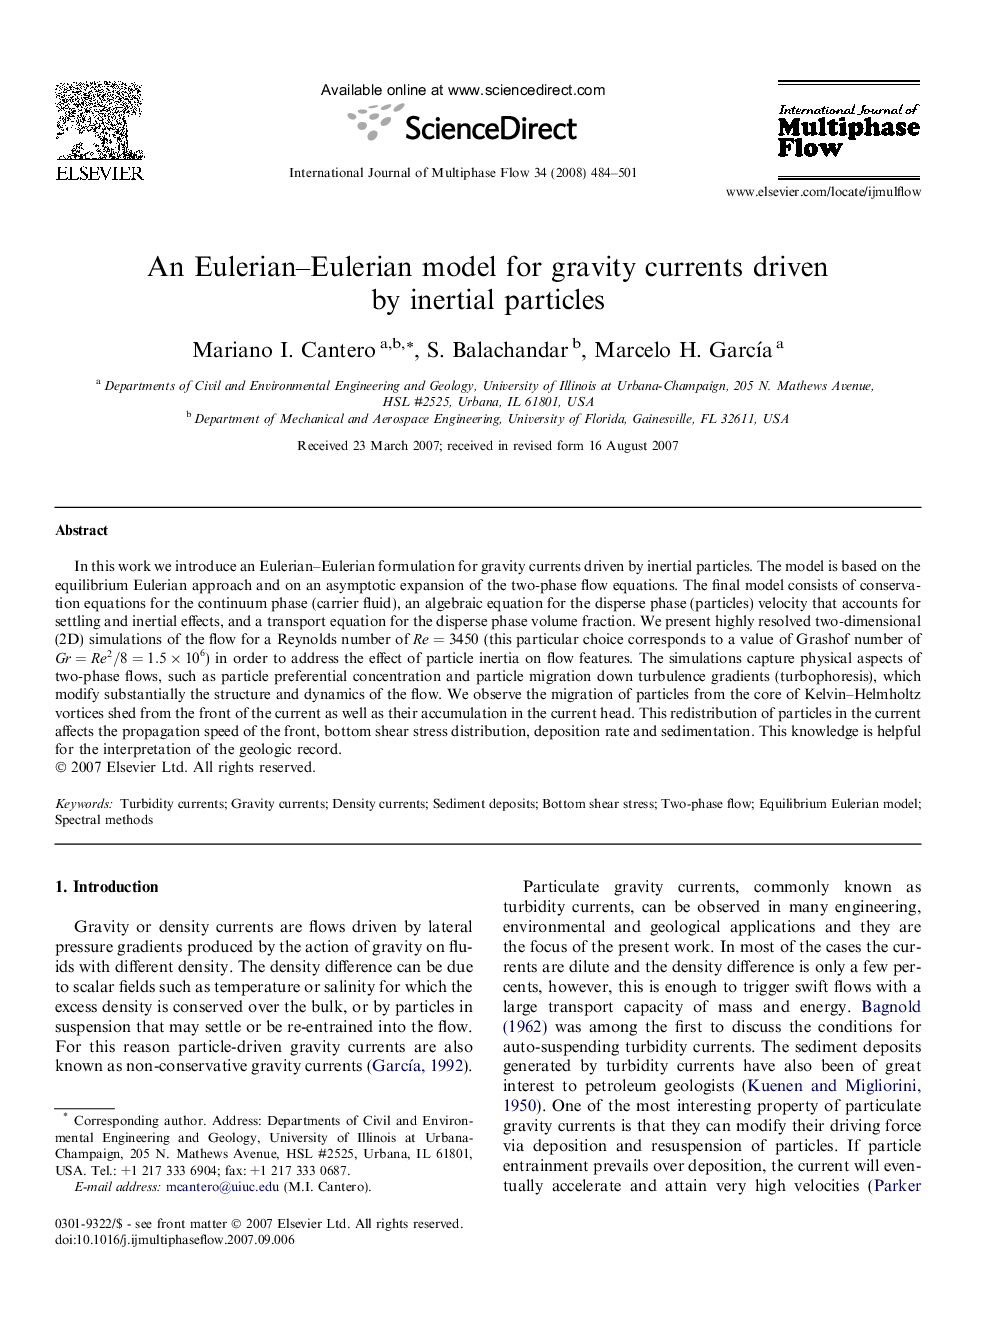 An Eulerian–Eulerian model for gravity currents driven by inertial particles